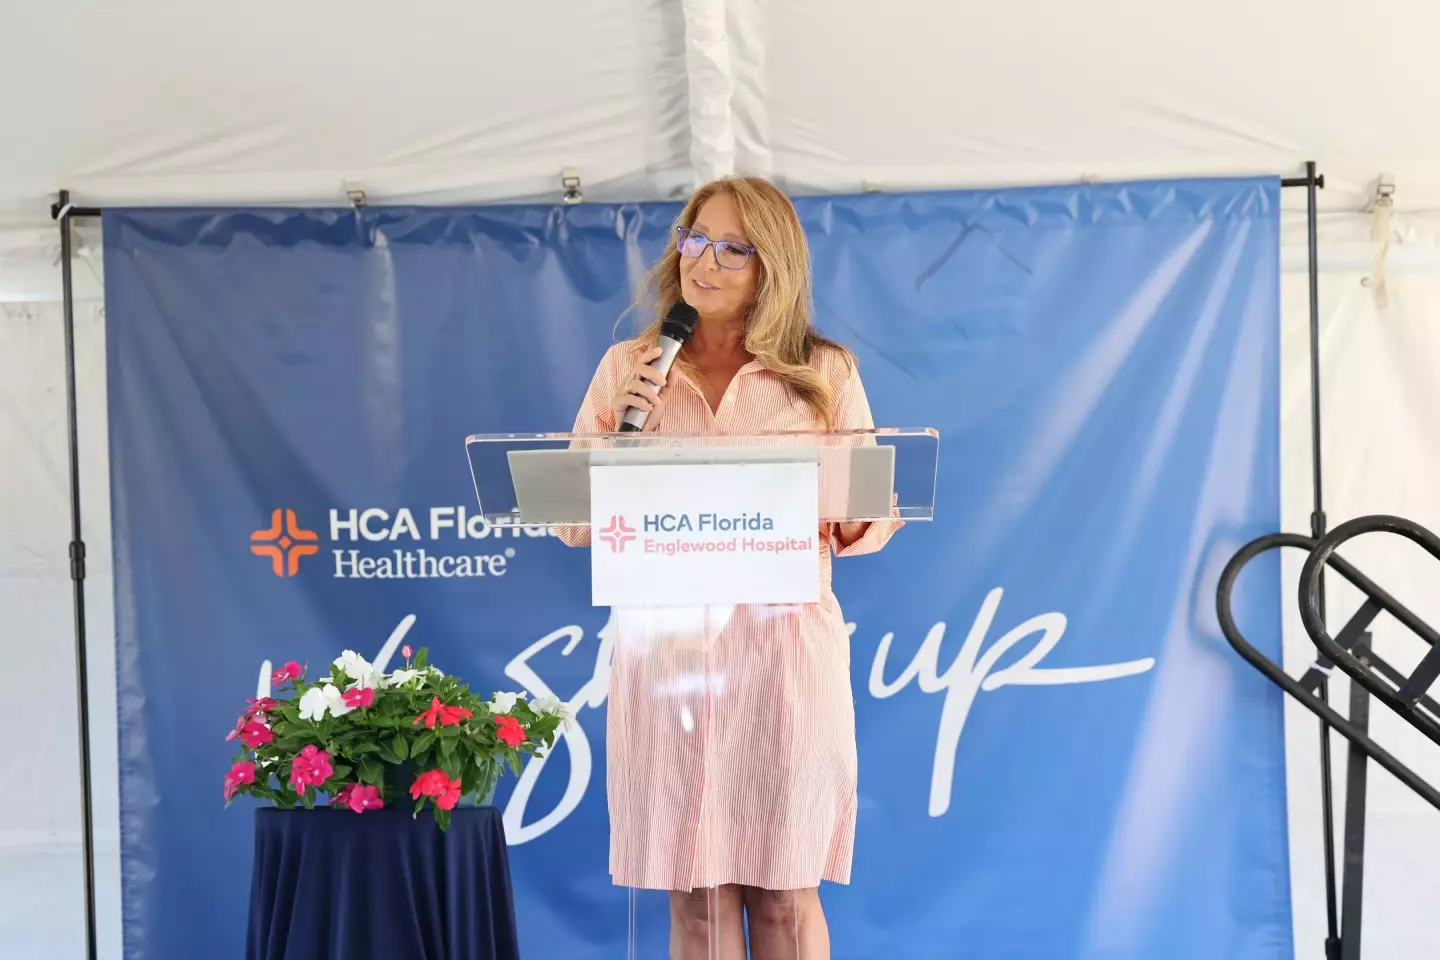 Englewood Hospital Board of Trustees Chairperson Erin Halstead pointed to the $61 million total economic contribution from the hospital in 2023 and the continued commitment to provide expanded access to care in our region.